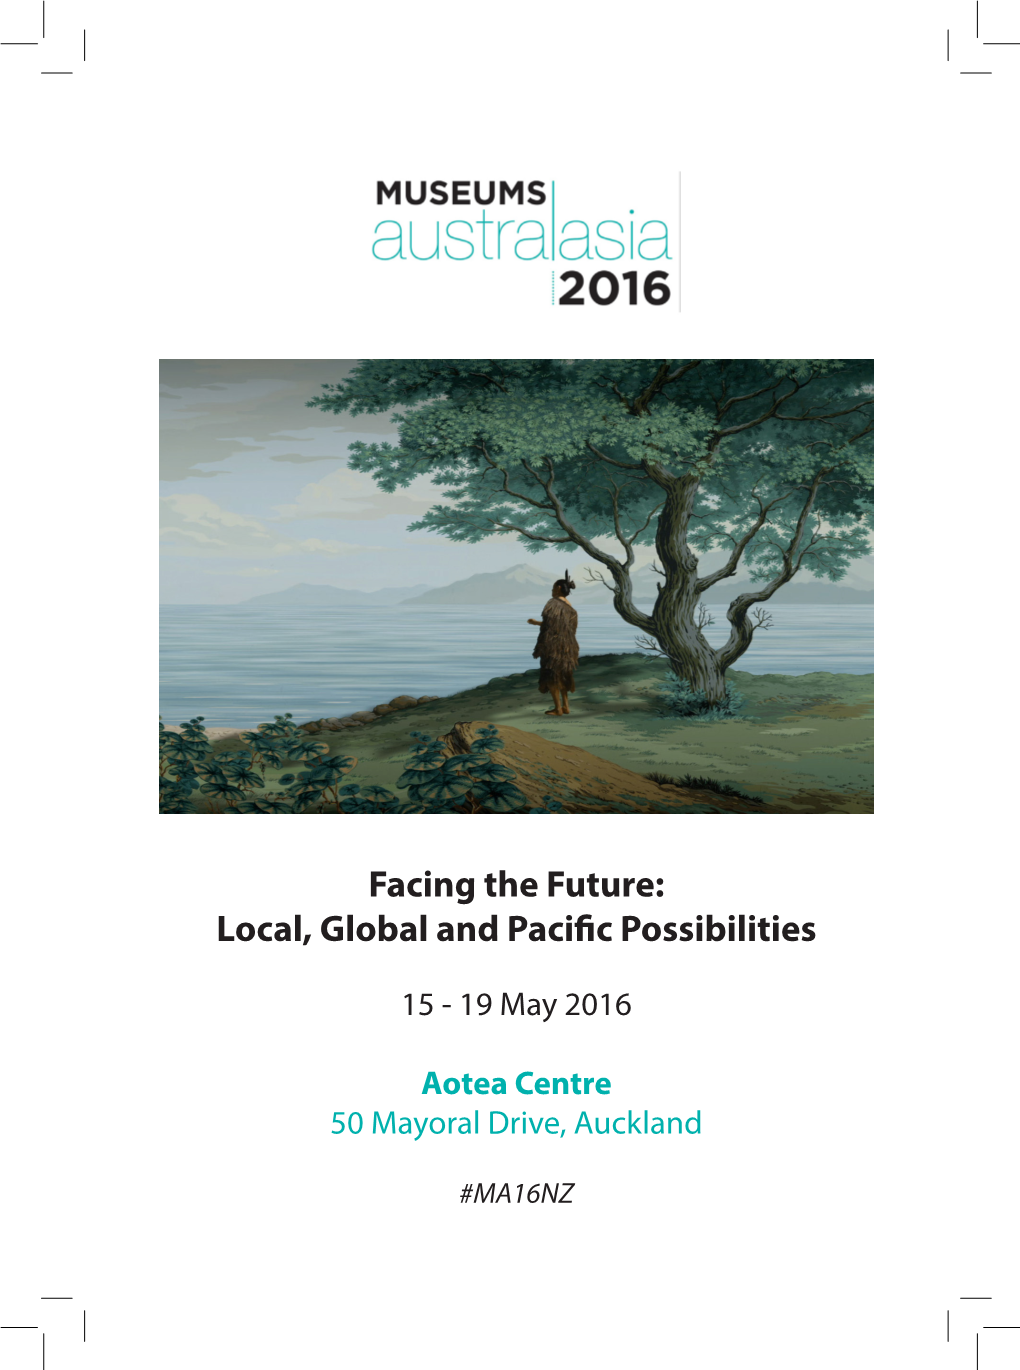 Facing the Future: Local, Global and Pacific Possibilities